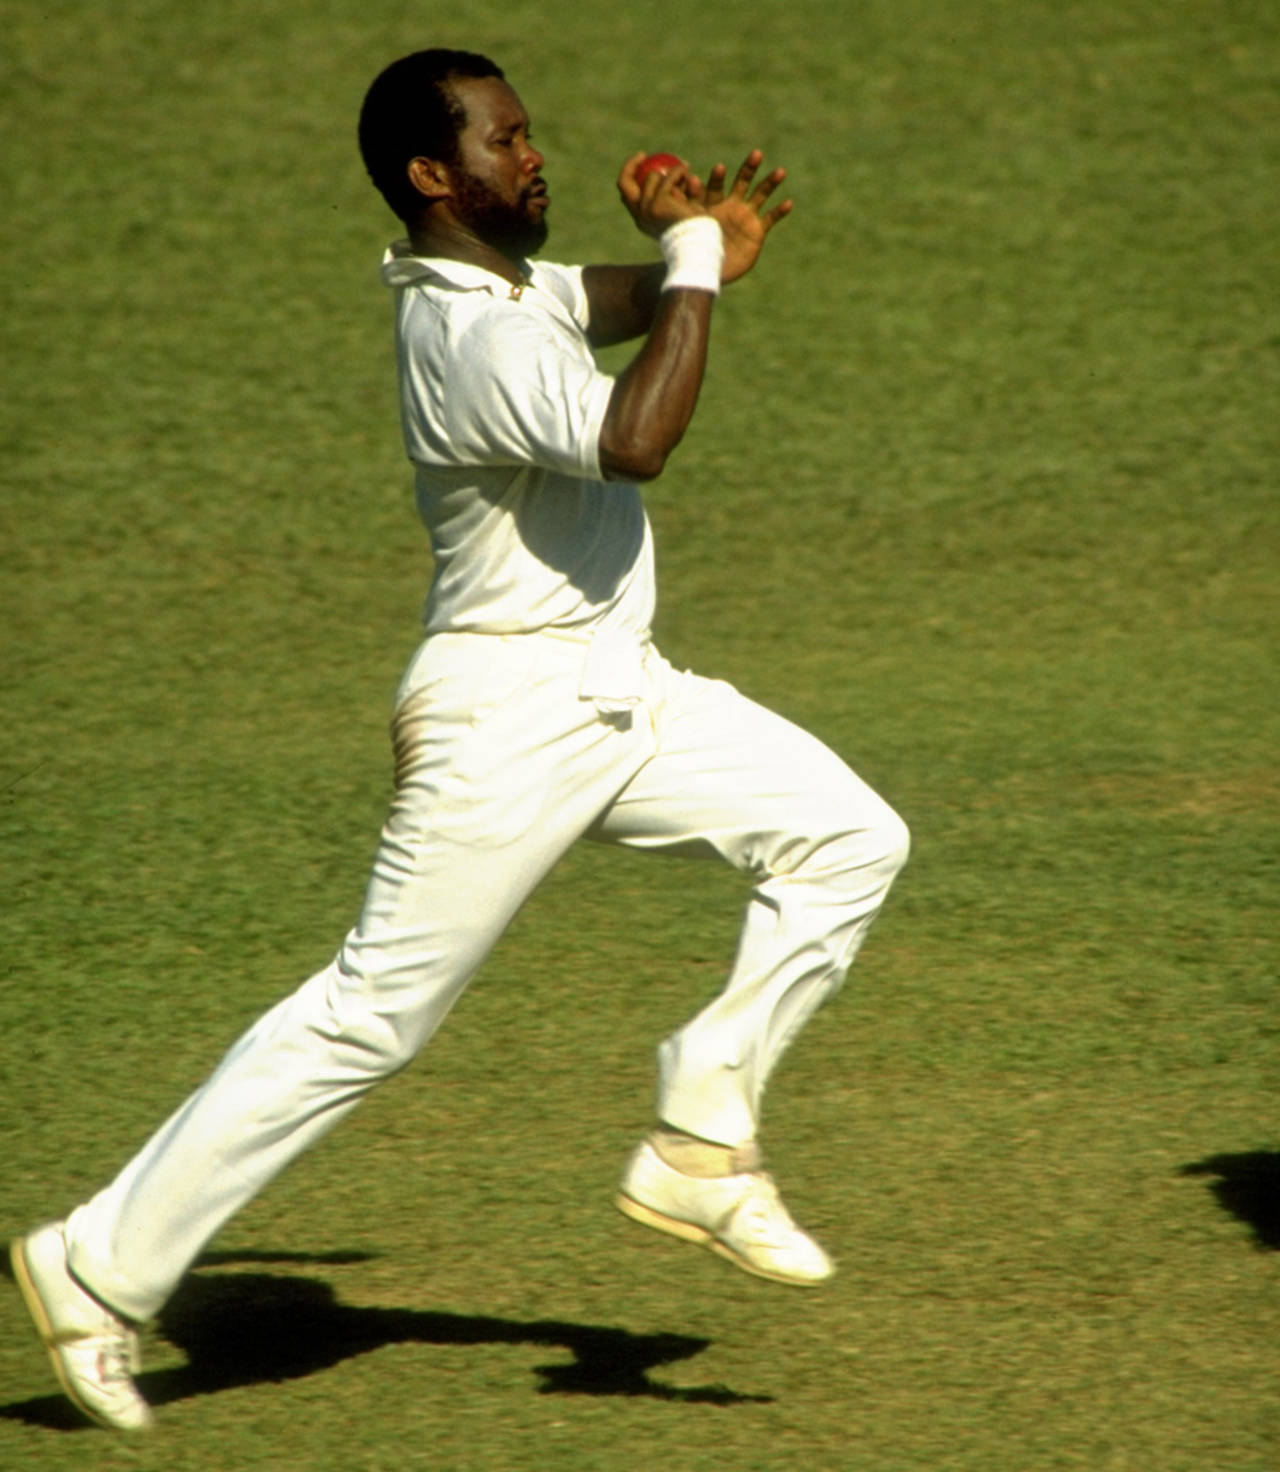 Malcolm Marshall in action, April 10, 1991